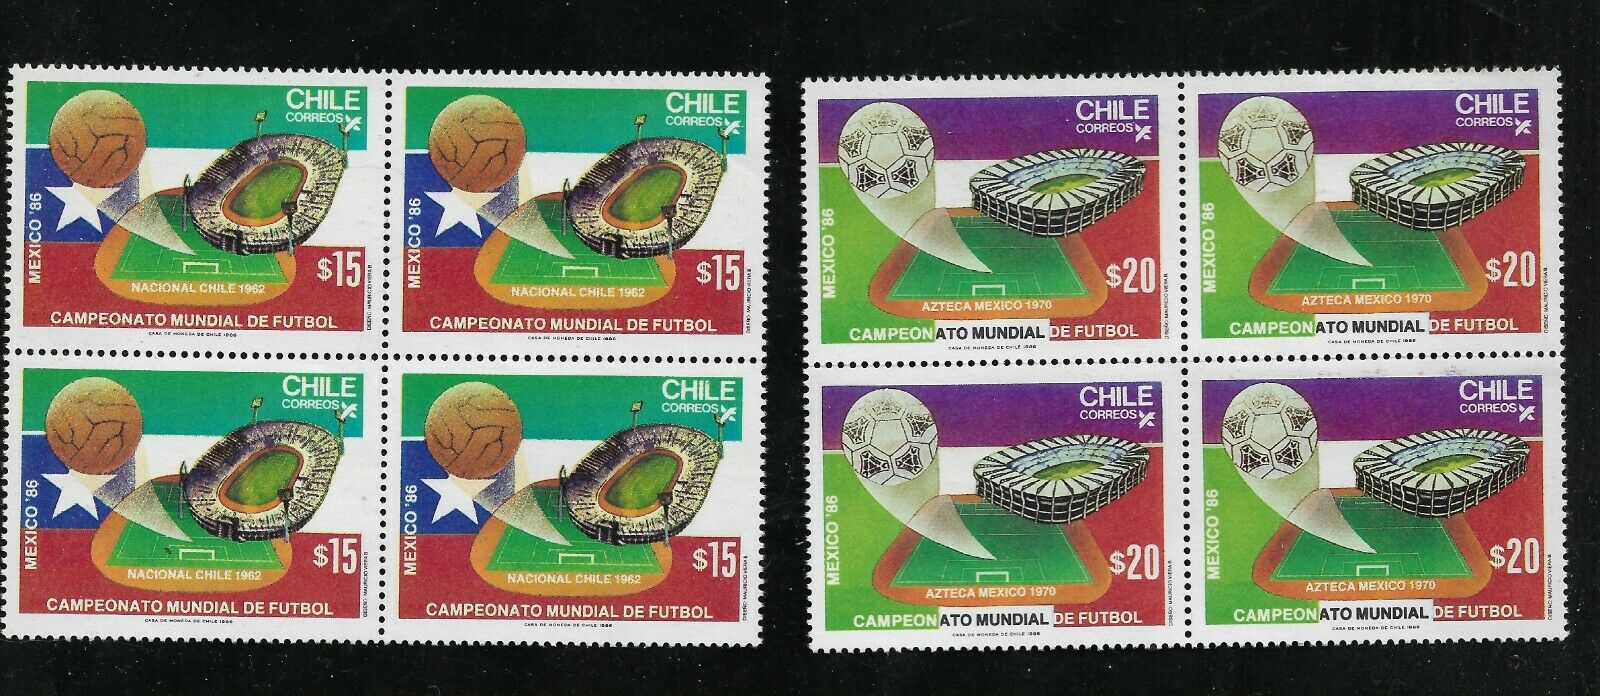 Chile 2 blocks of four stamps 1986 Mexico football world cup,$15,$20, MNH V.fine